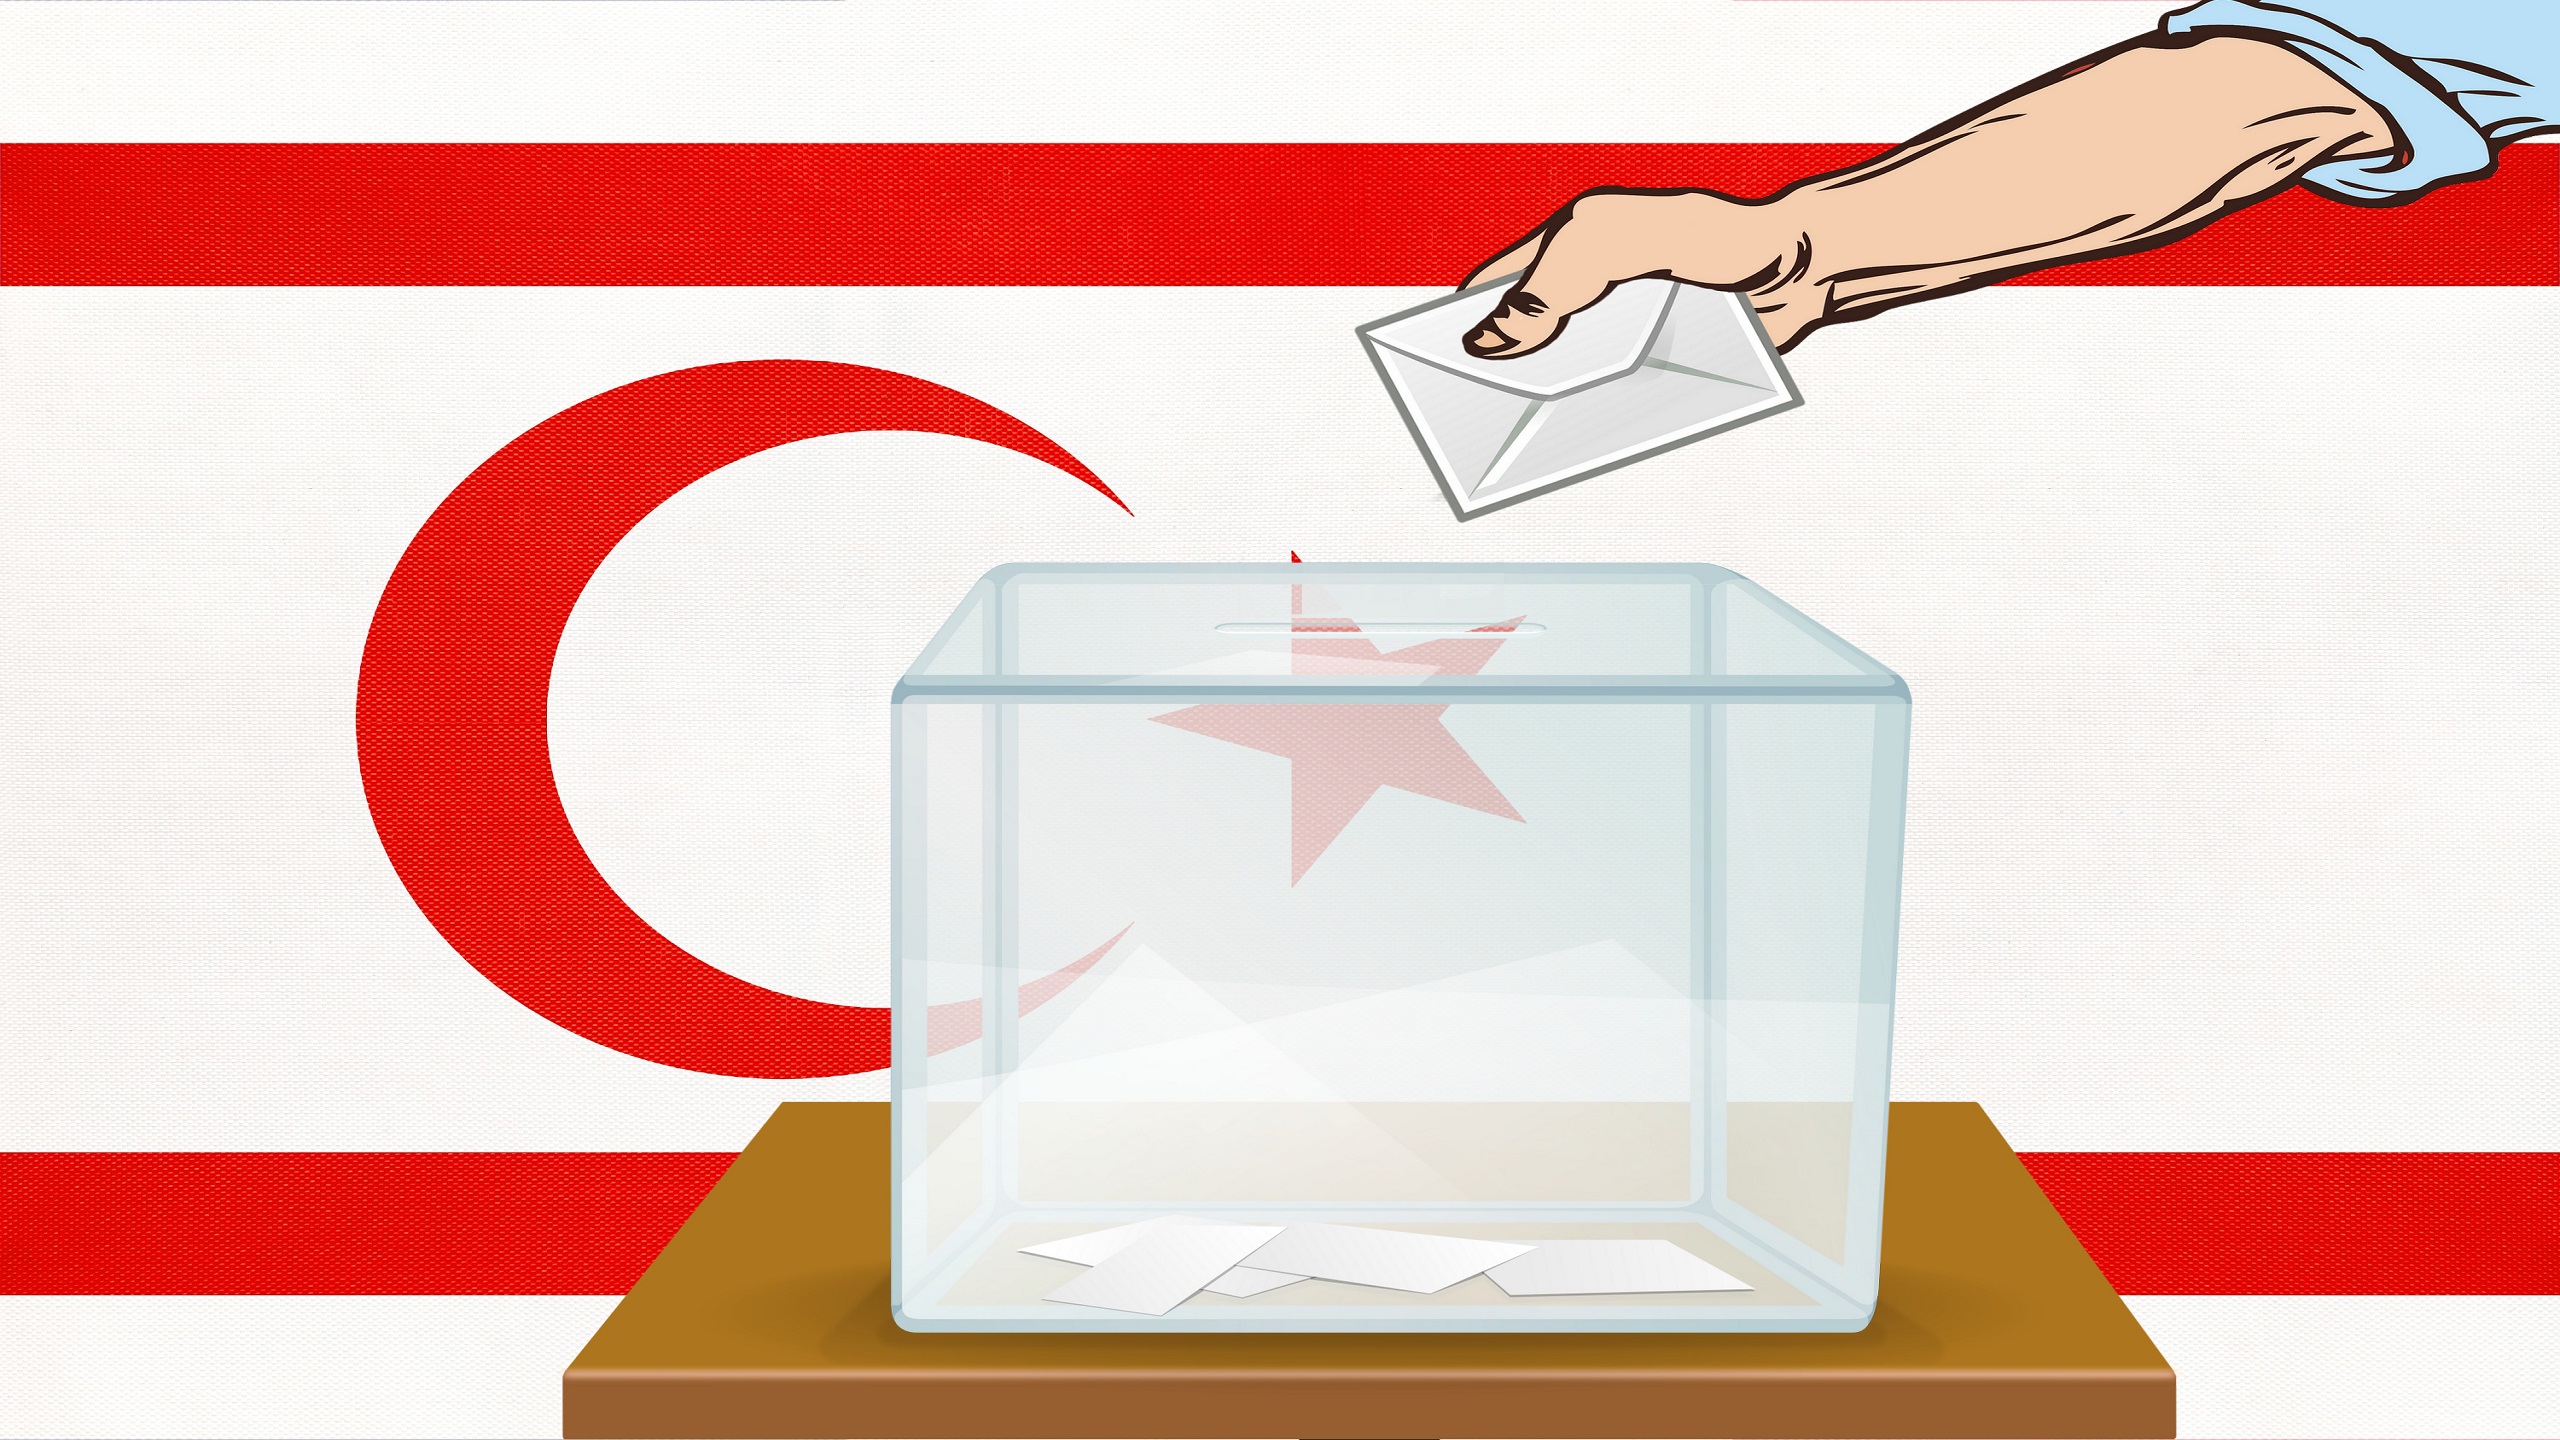 Northern Cyprus Elections Embroiled in Turkish-Greek Conflict